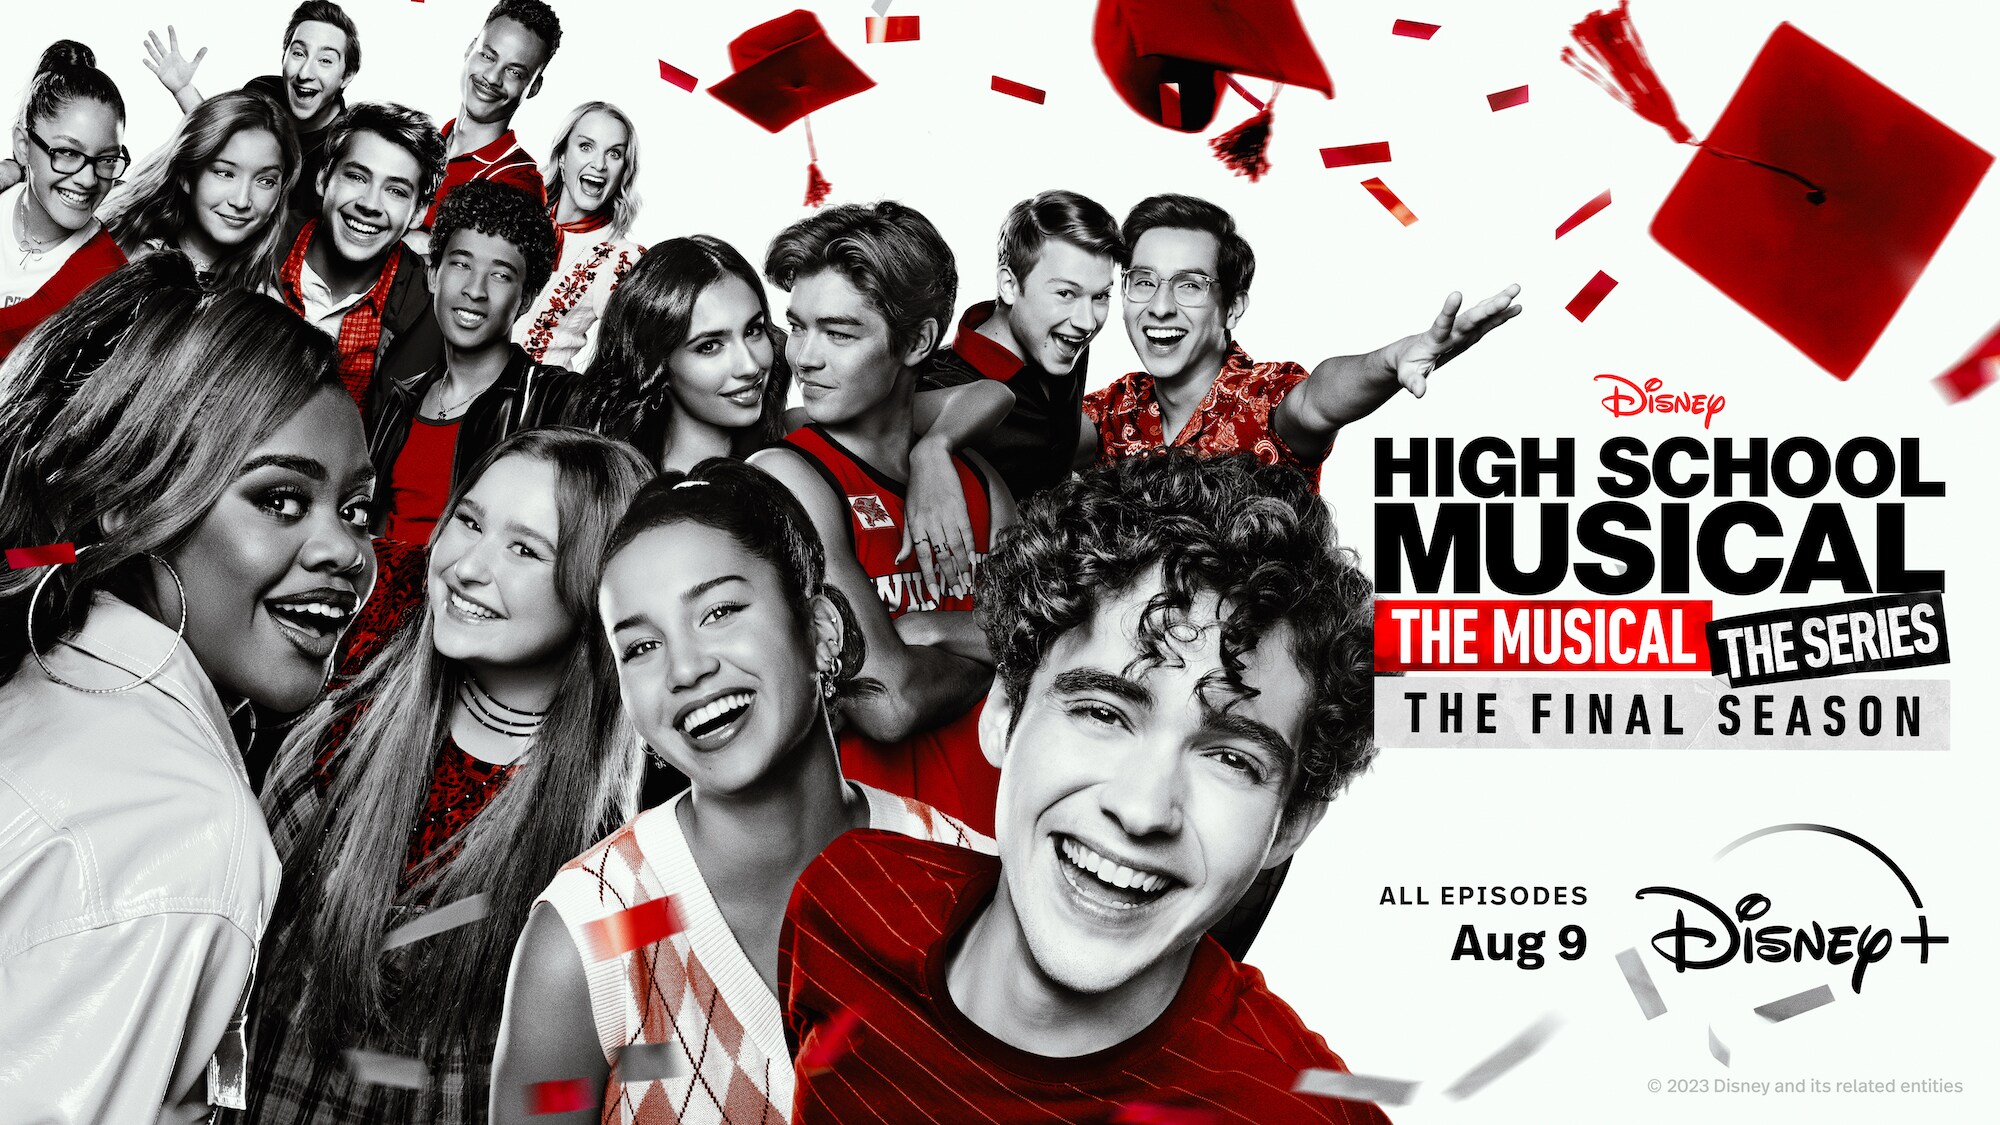 It\'s Now Or Never! Disney+ Premiere Season Highly Reveals Plus Of August Musical: Anticipated Ahead Four “High Of Press | The Disney The School Official Trailer 9 Musical: Series”